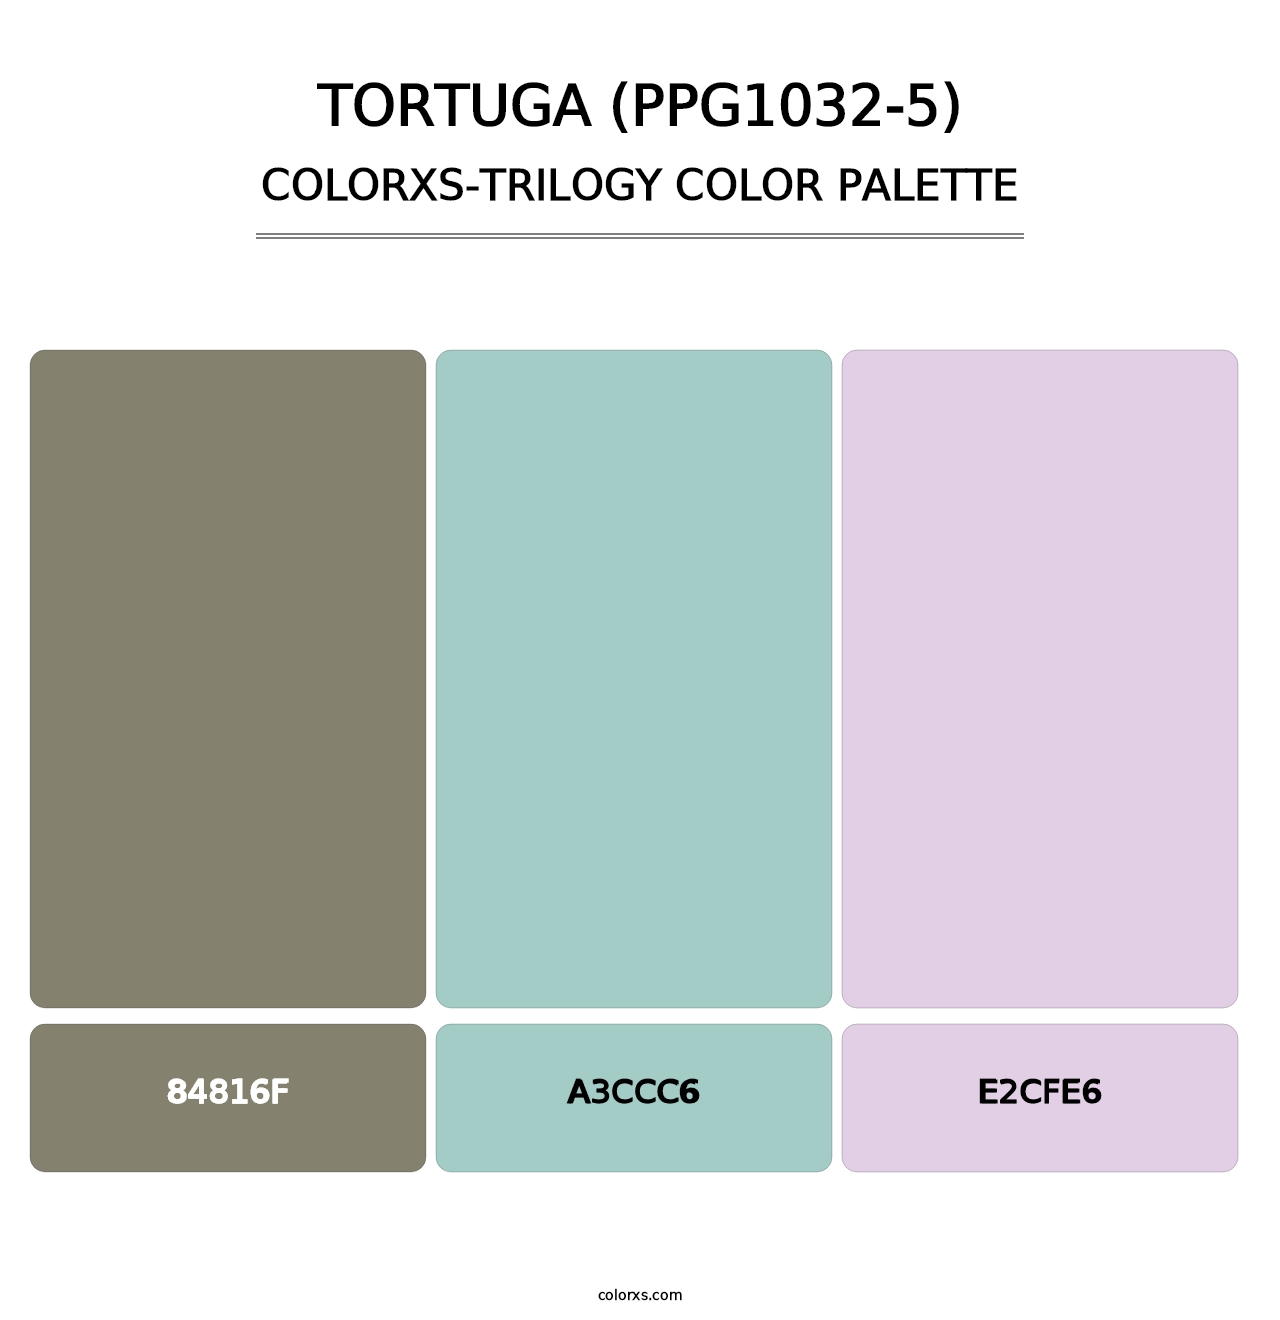 Tortuga (PPG1032-5) - Colorxs Trilogy Palette